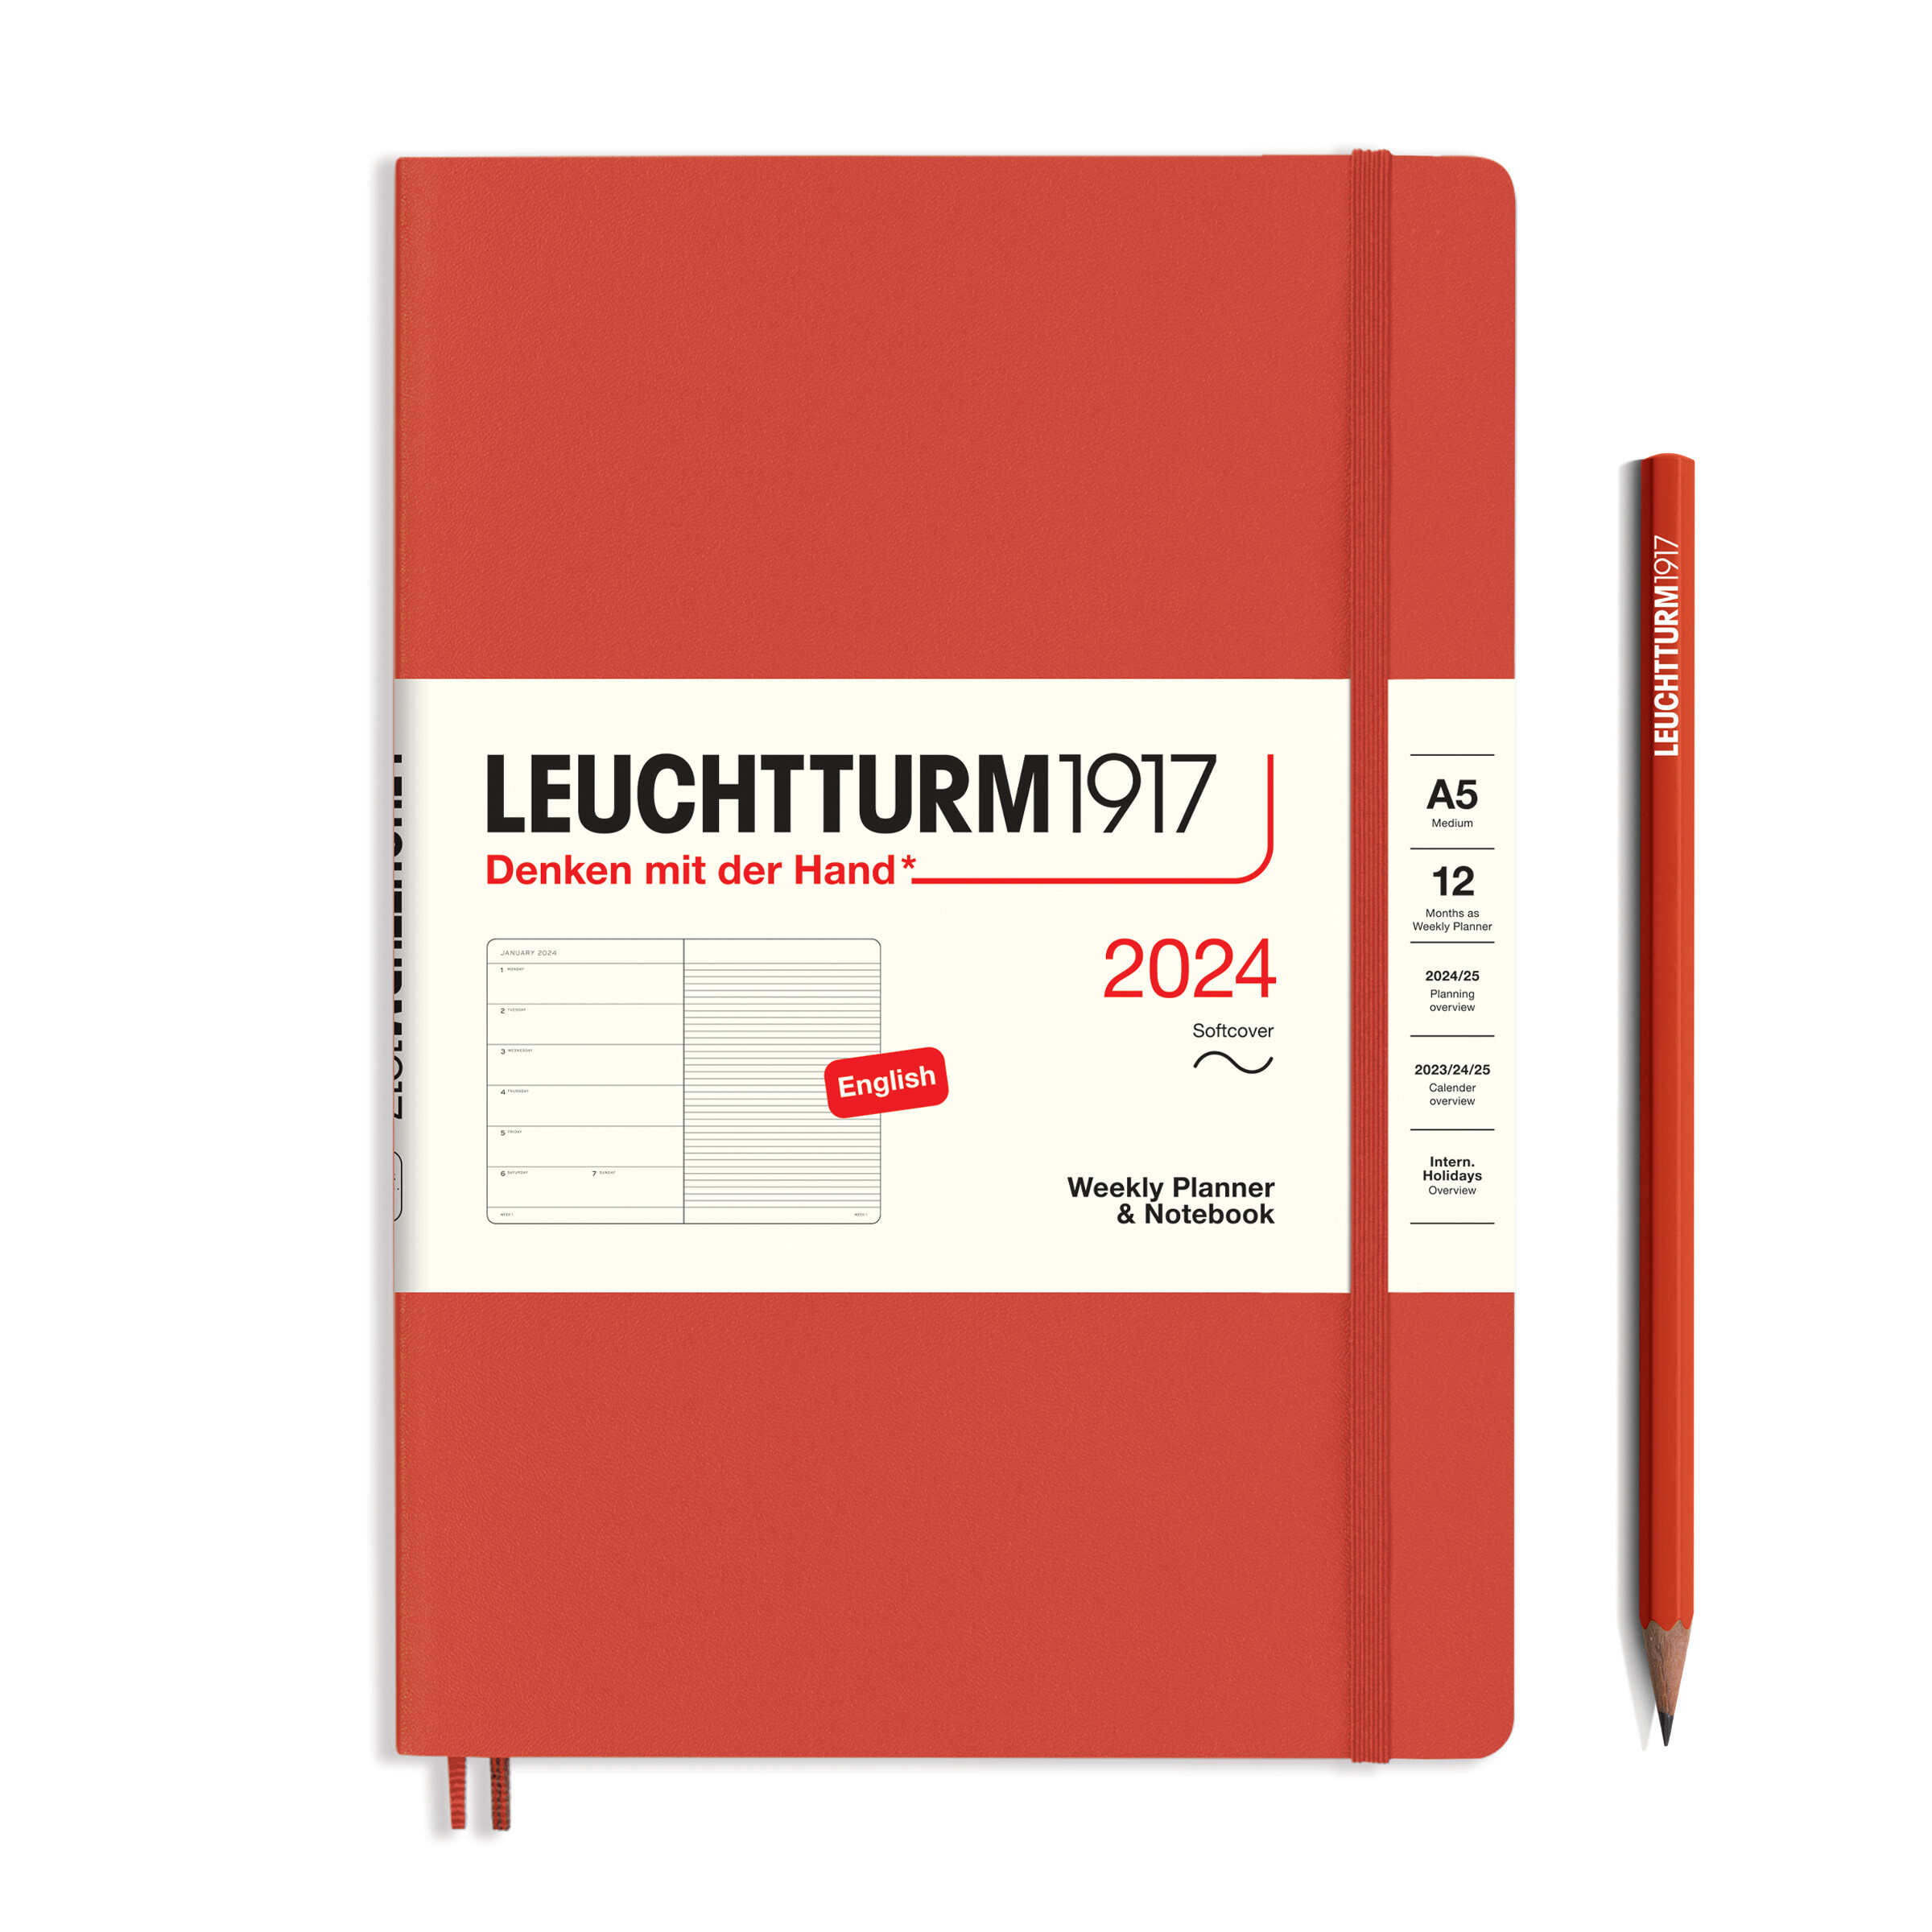 Leuchtturm1917 Weekly Planner & Notebook Soft Cover Medium A5 2024 - Pencraft the boutique